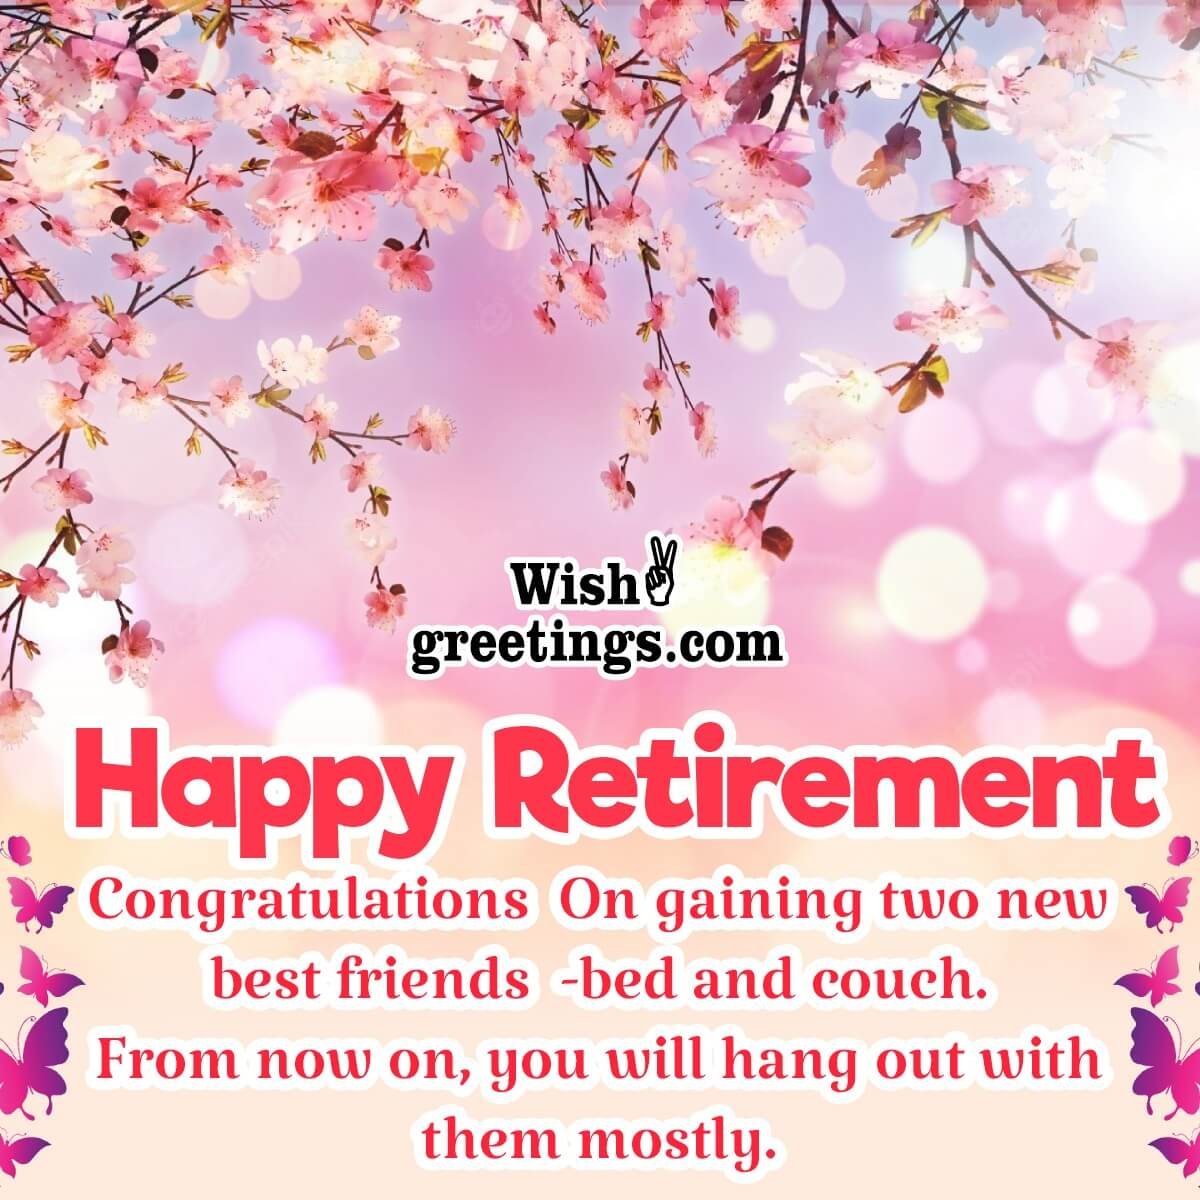 The Ultimate Collection of 4K Retirement Wishes Images - Top 999 ...